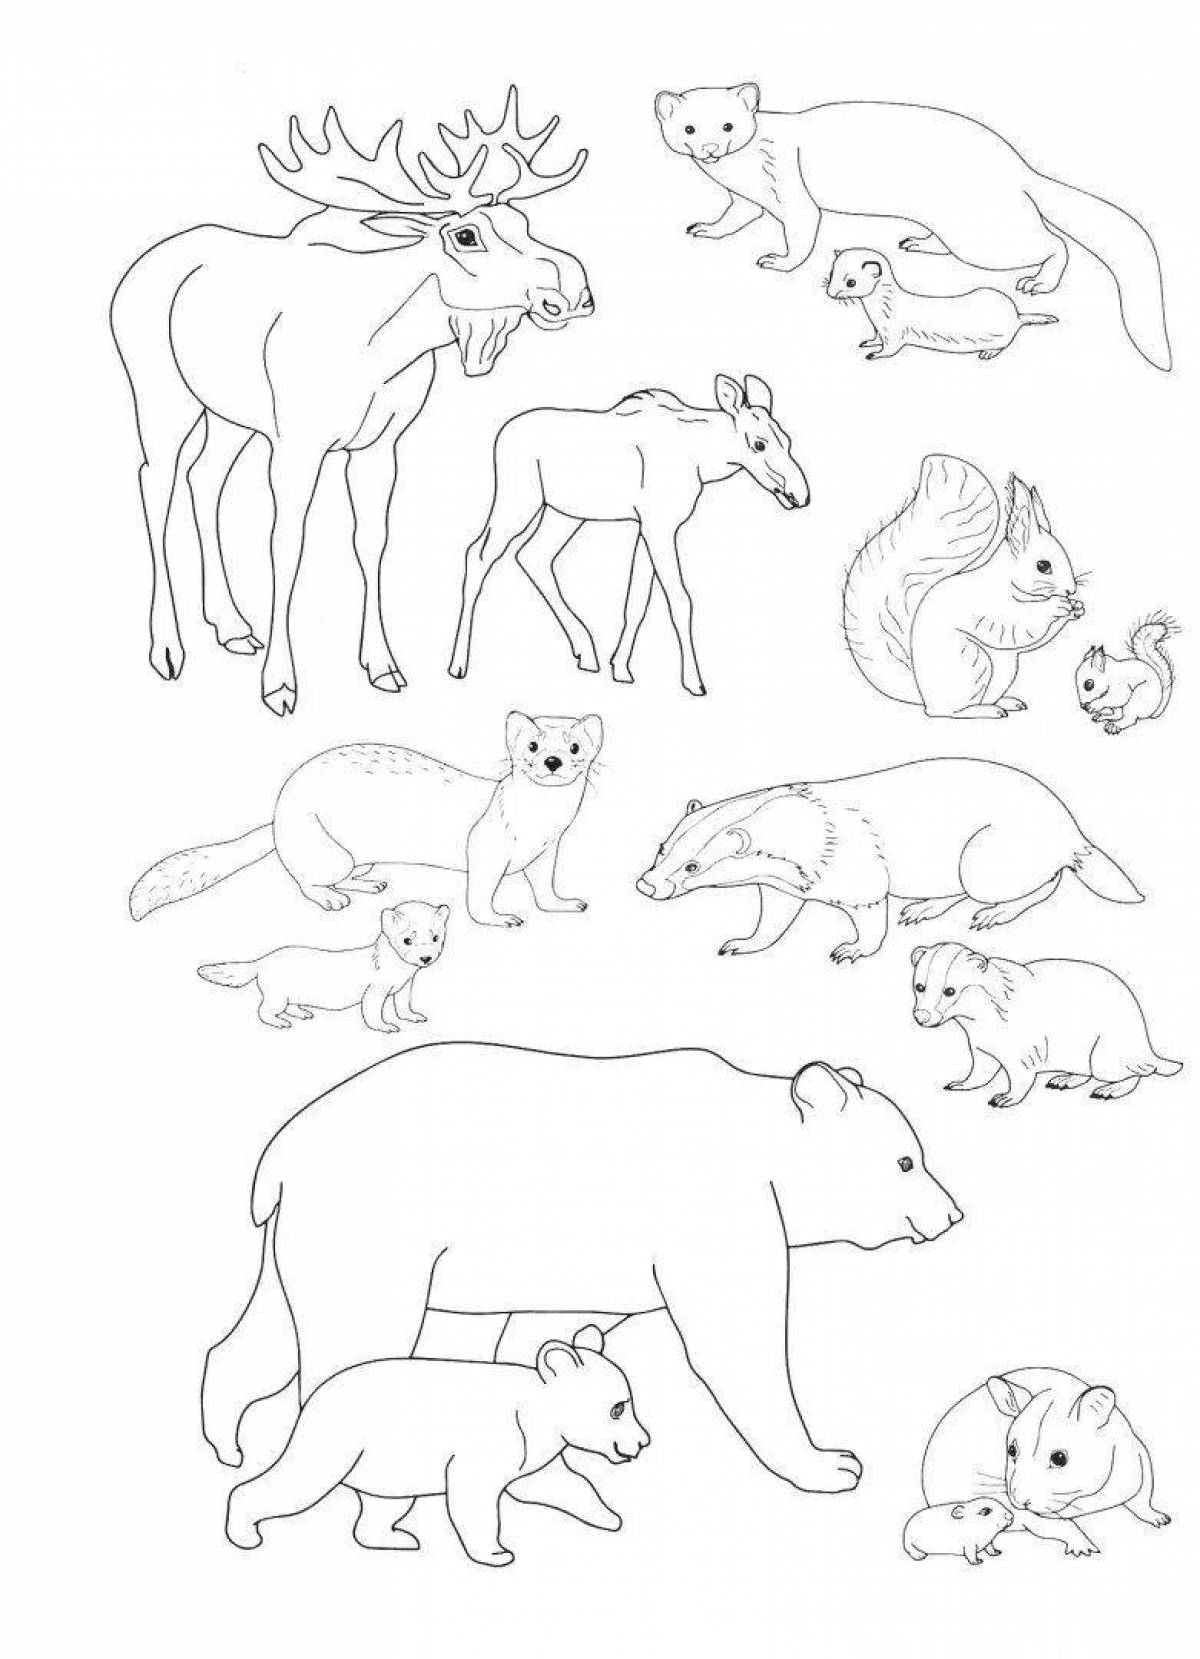 Colorful Russian animal coloring book